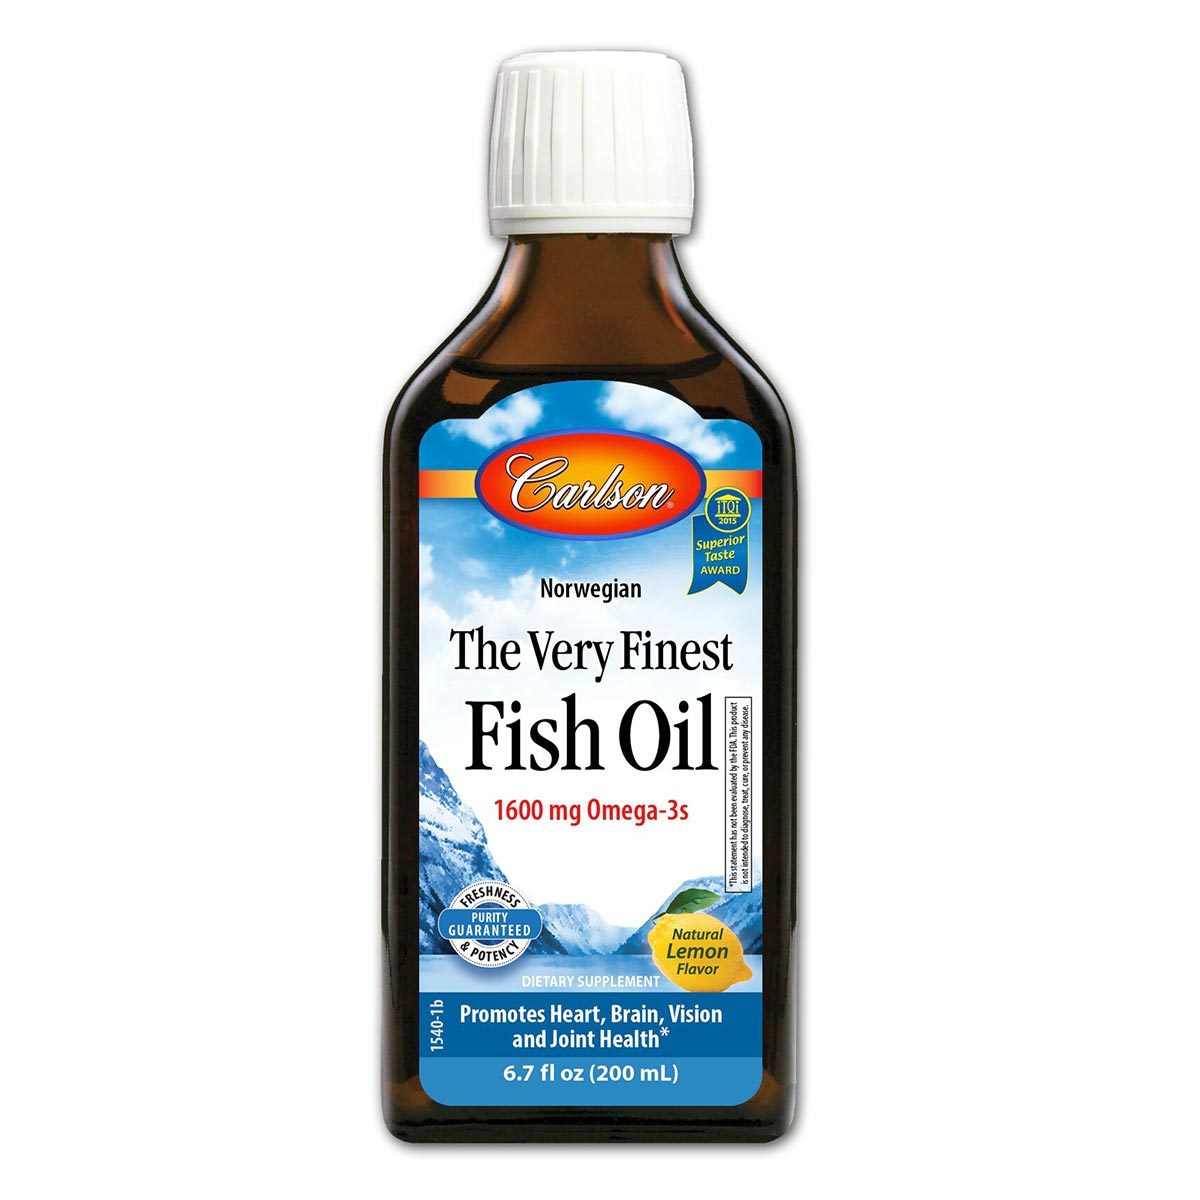 Primary image of The Very Finest Fish Oil - Lemon